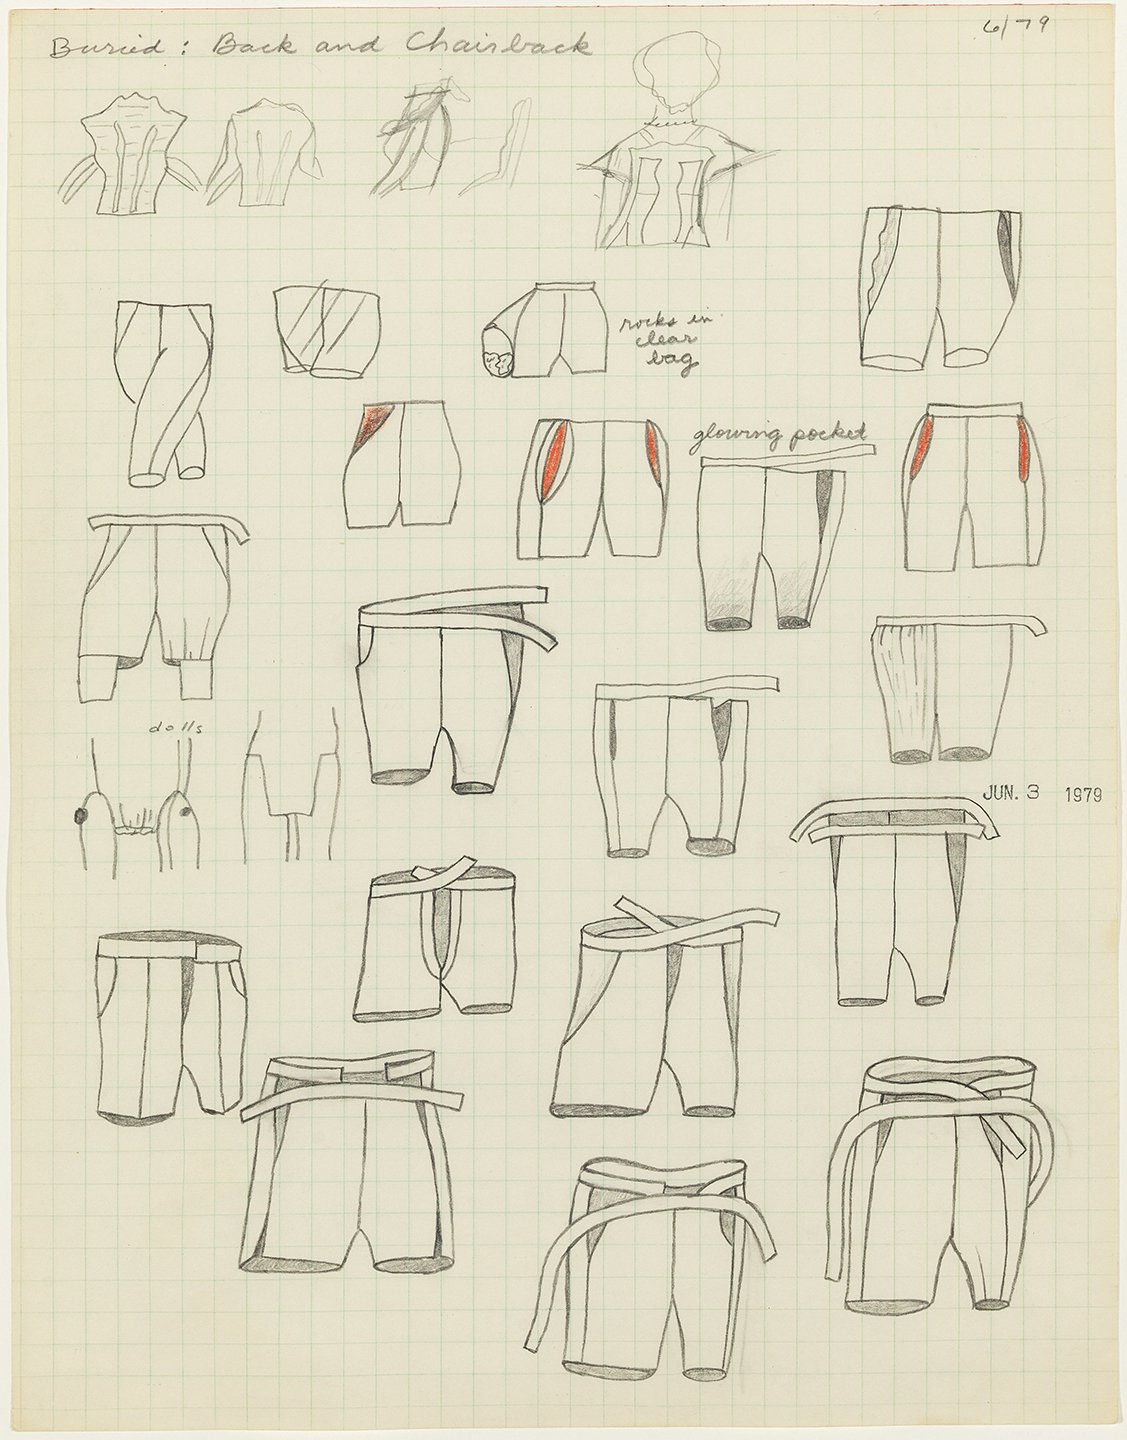  Christina Ramberg,  Untitled (shorts) ,  1979, graphite on paper, 15.75 x 12.75 inches (framed). Courtesy of the Estate of Christina Ramberg and Corbett vs. Dempsey. 